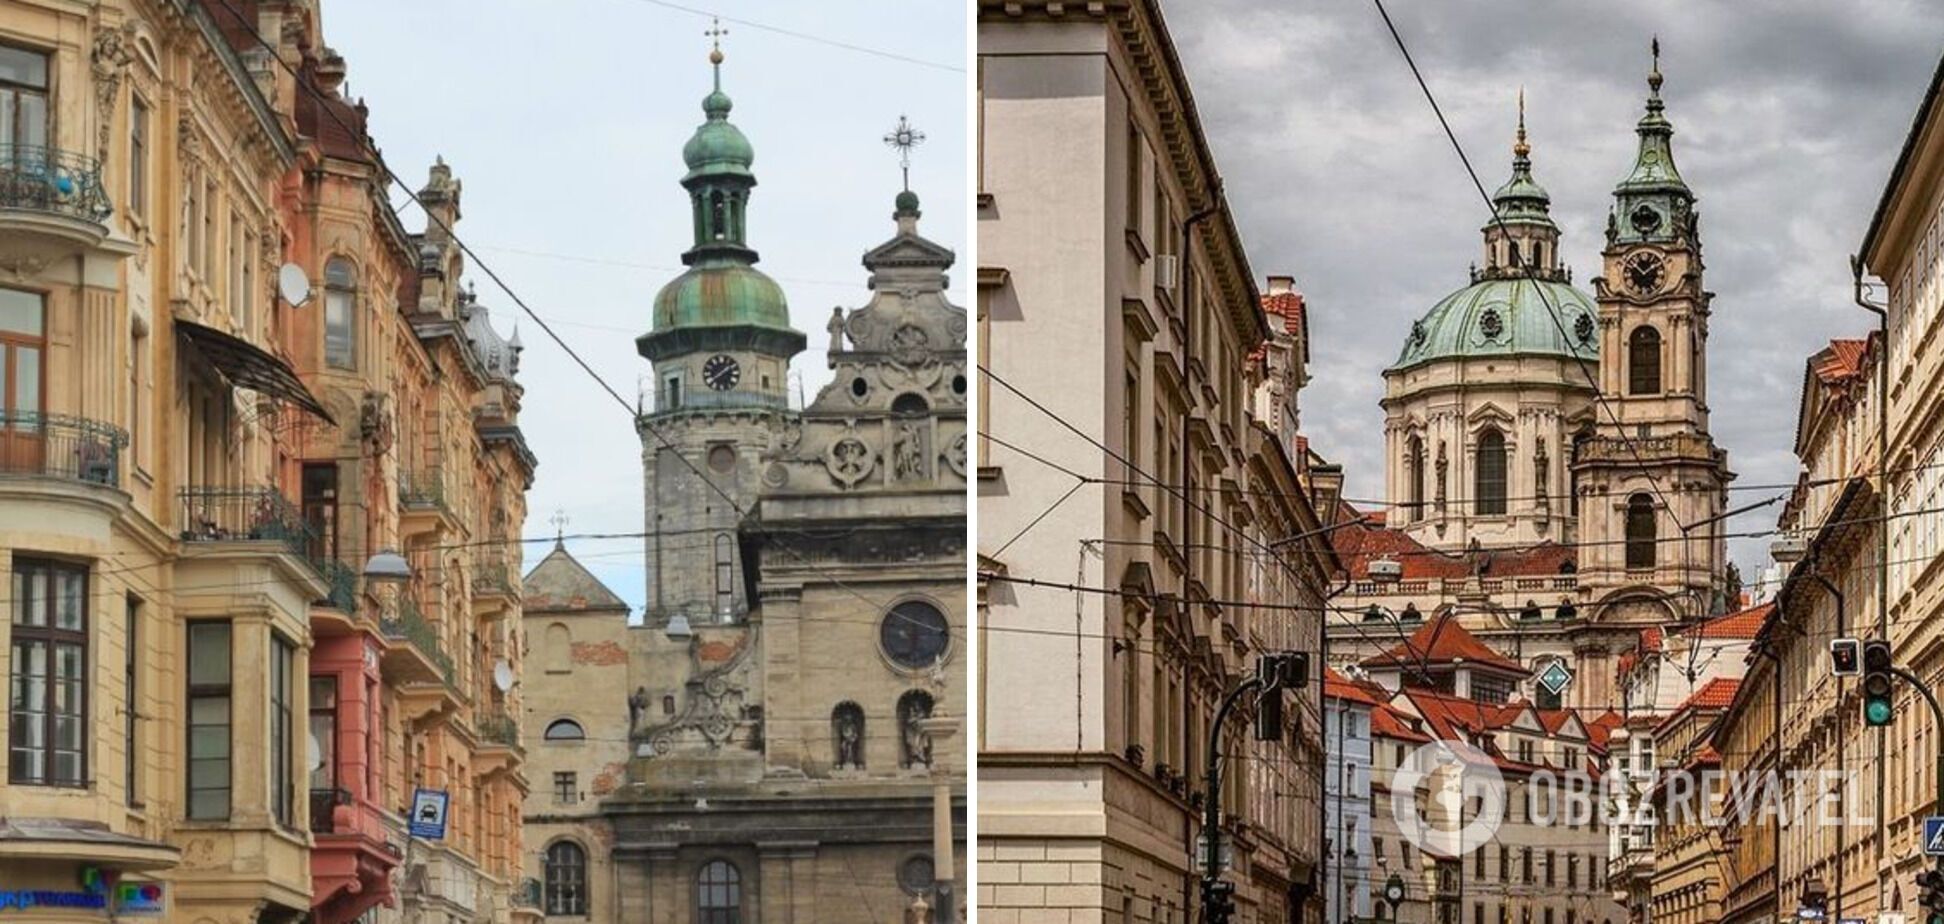 Dnipro is like New York, and Truskavets is like Rio de Janeiro: Which Ukrainian cities have foreign ''twins''? Photo comparison